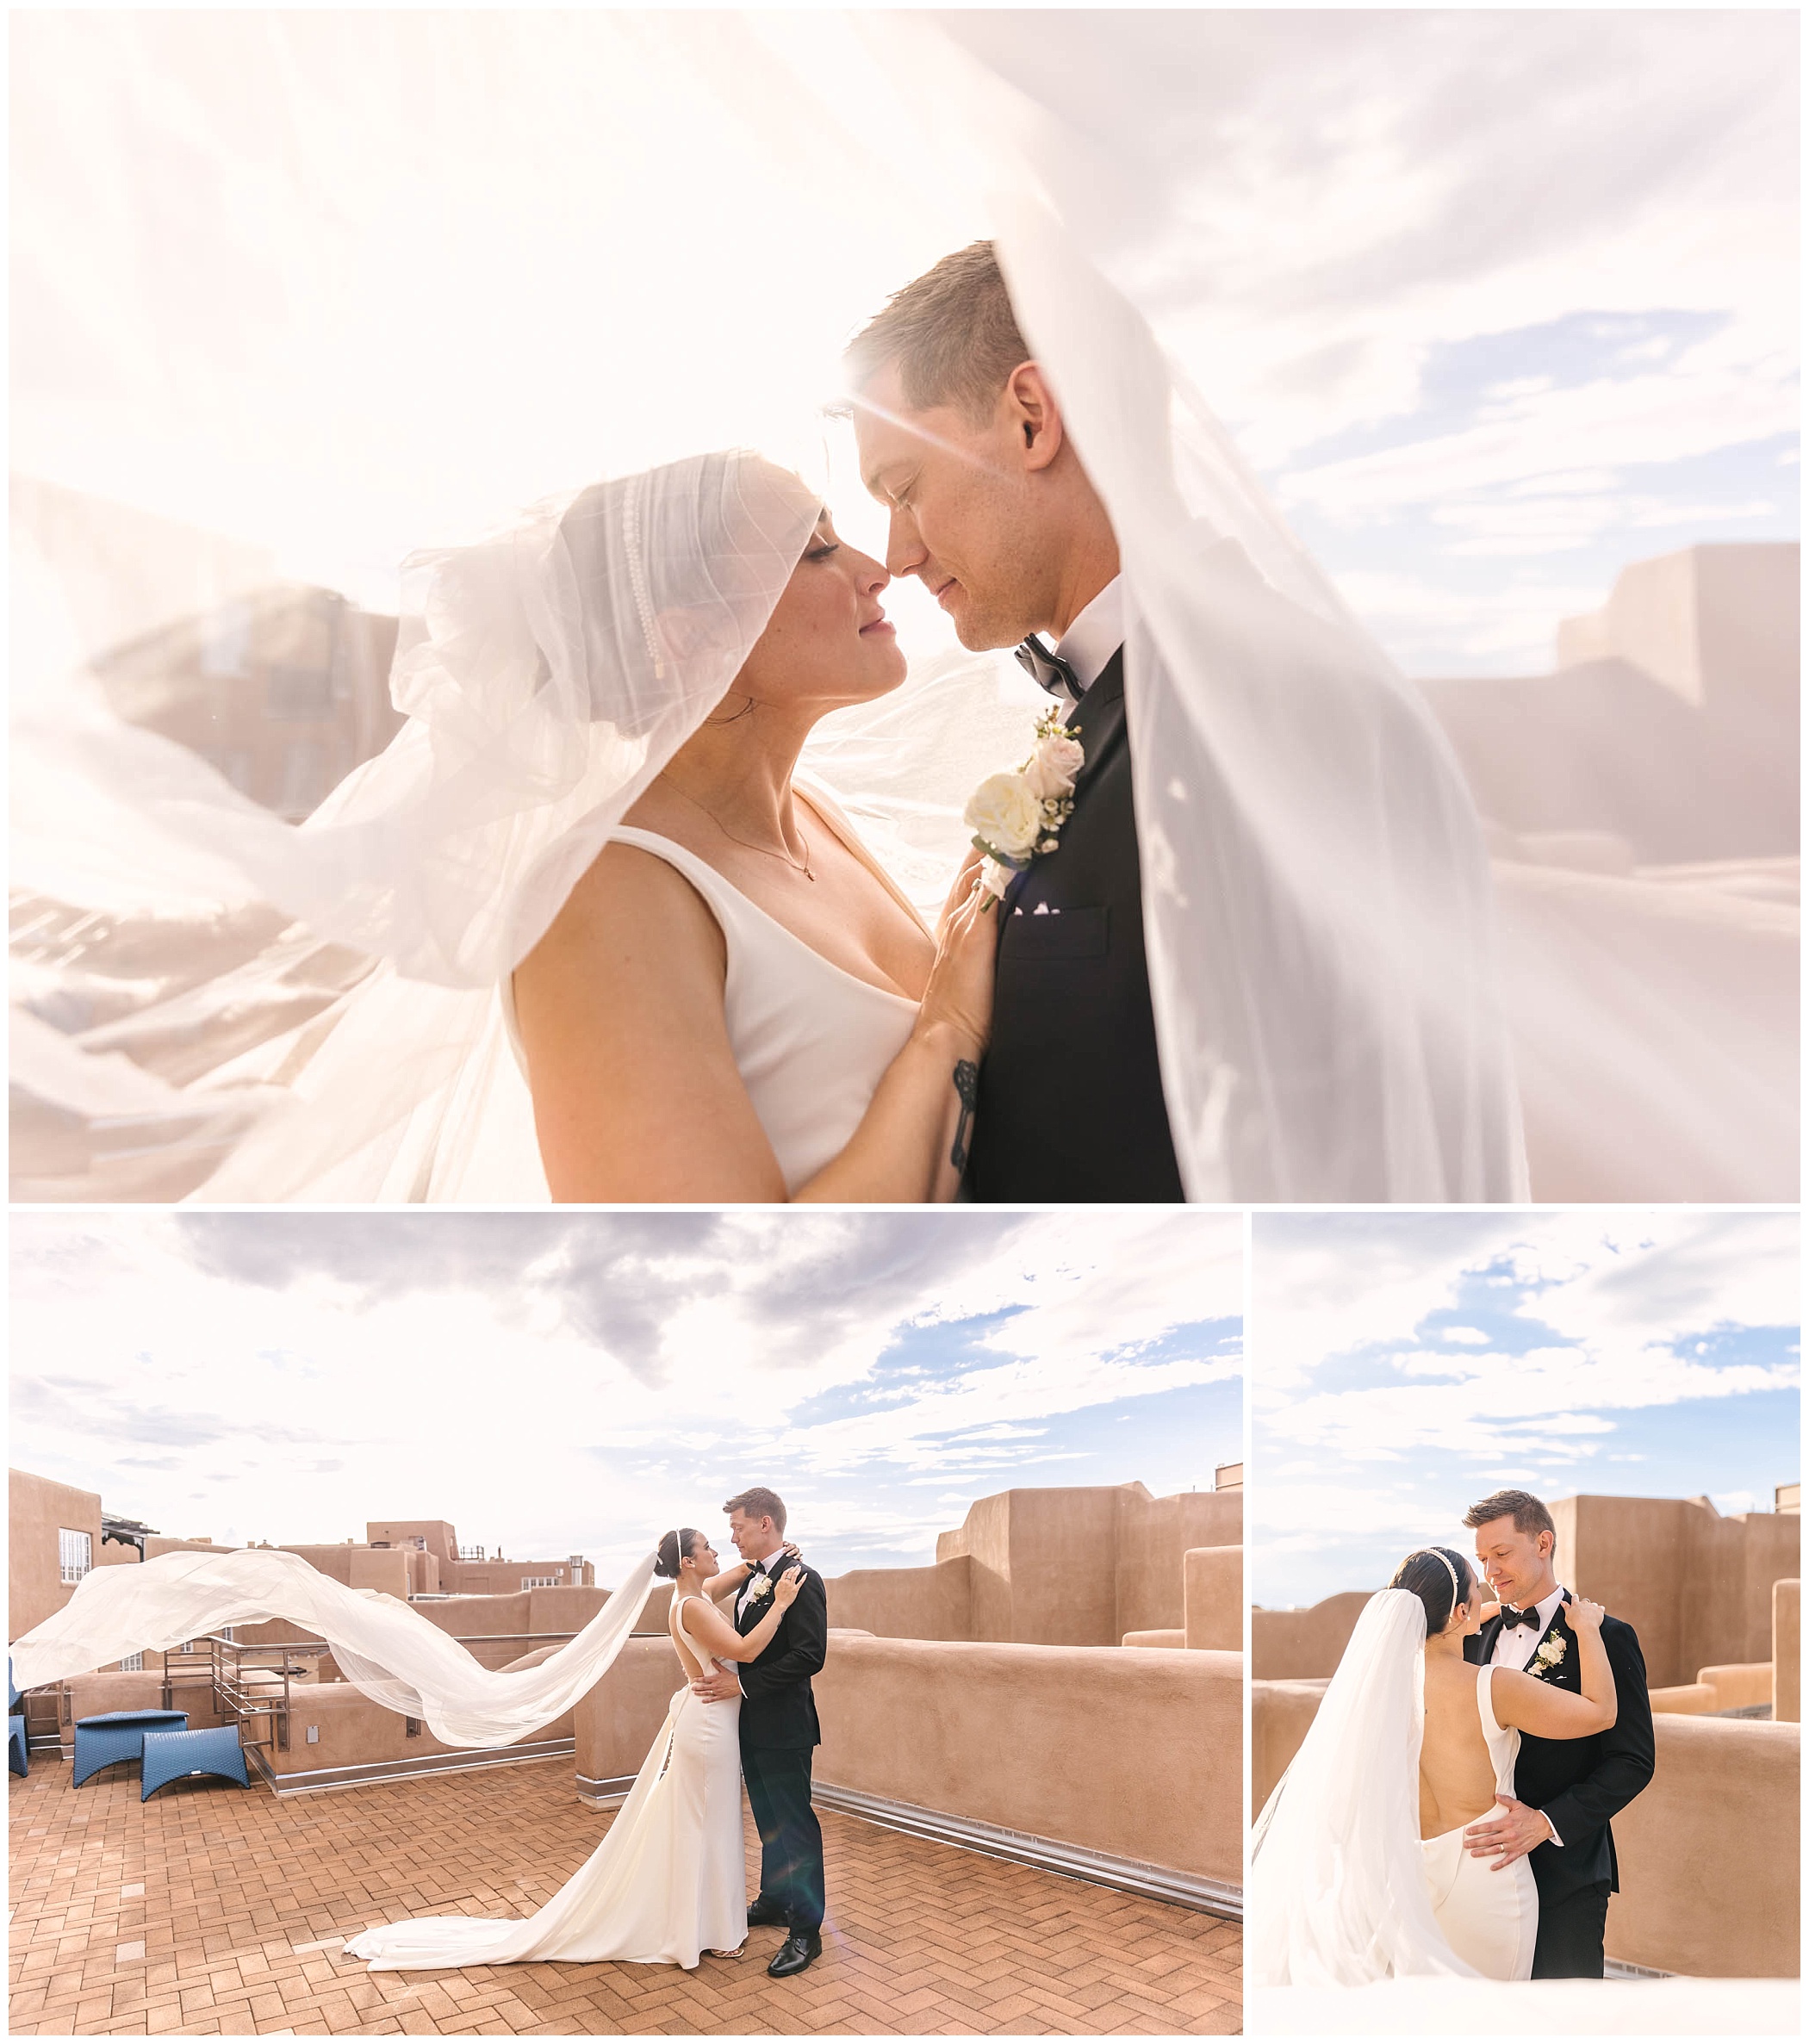 Golden hour bride and groom portraits on adobe rooftop at La Fonda on the Plaza wedding in Santa Fe New Mexico